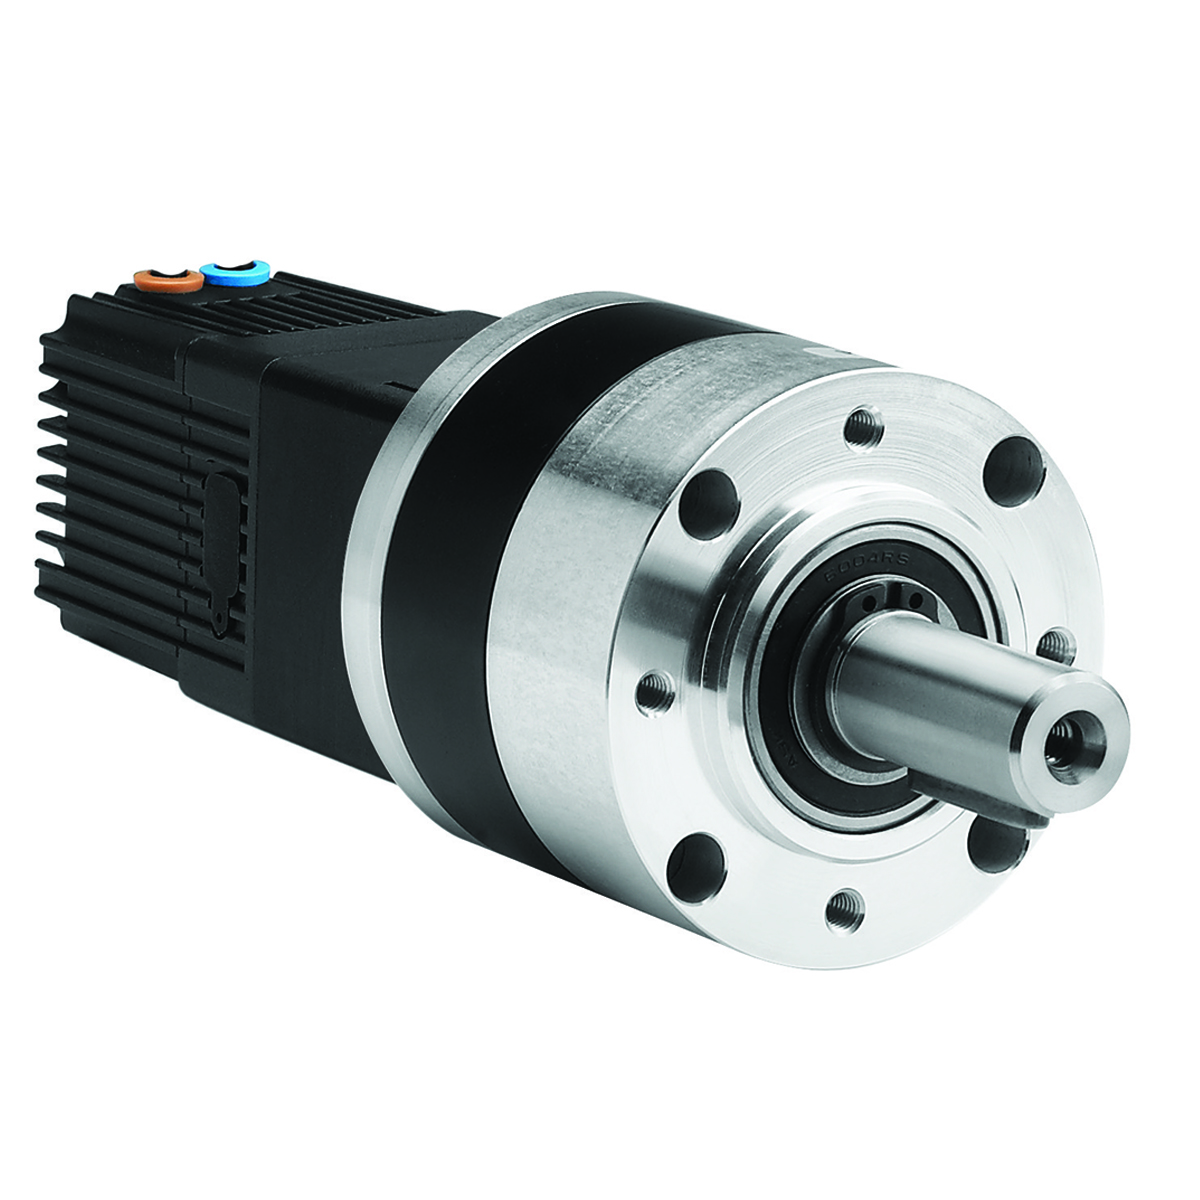 SQ57 Motor 150W 12-32Vdc + Drive TNi21 PWM + Gearbox P81 - 2 stages ratio 26.85